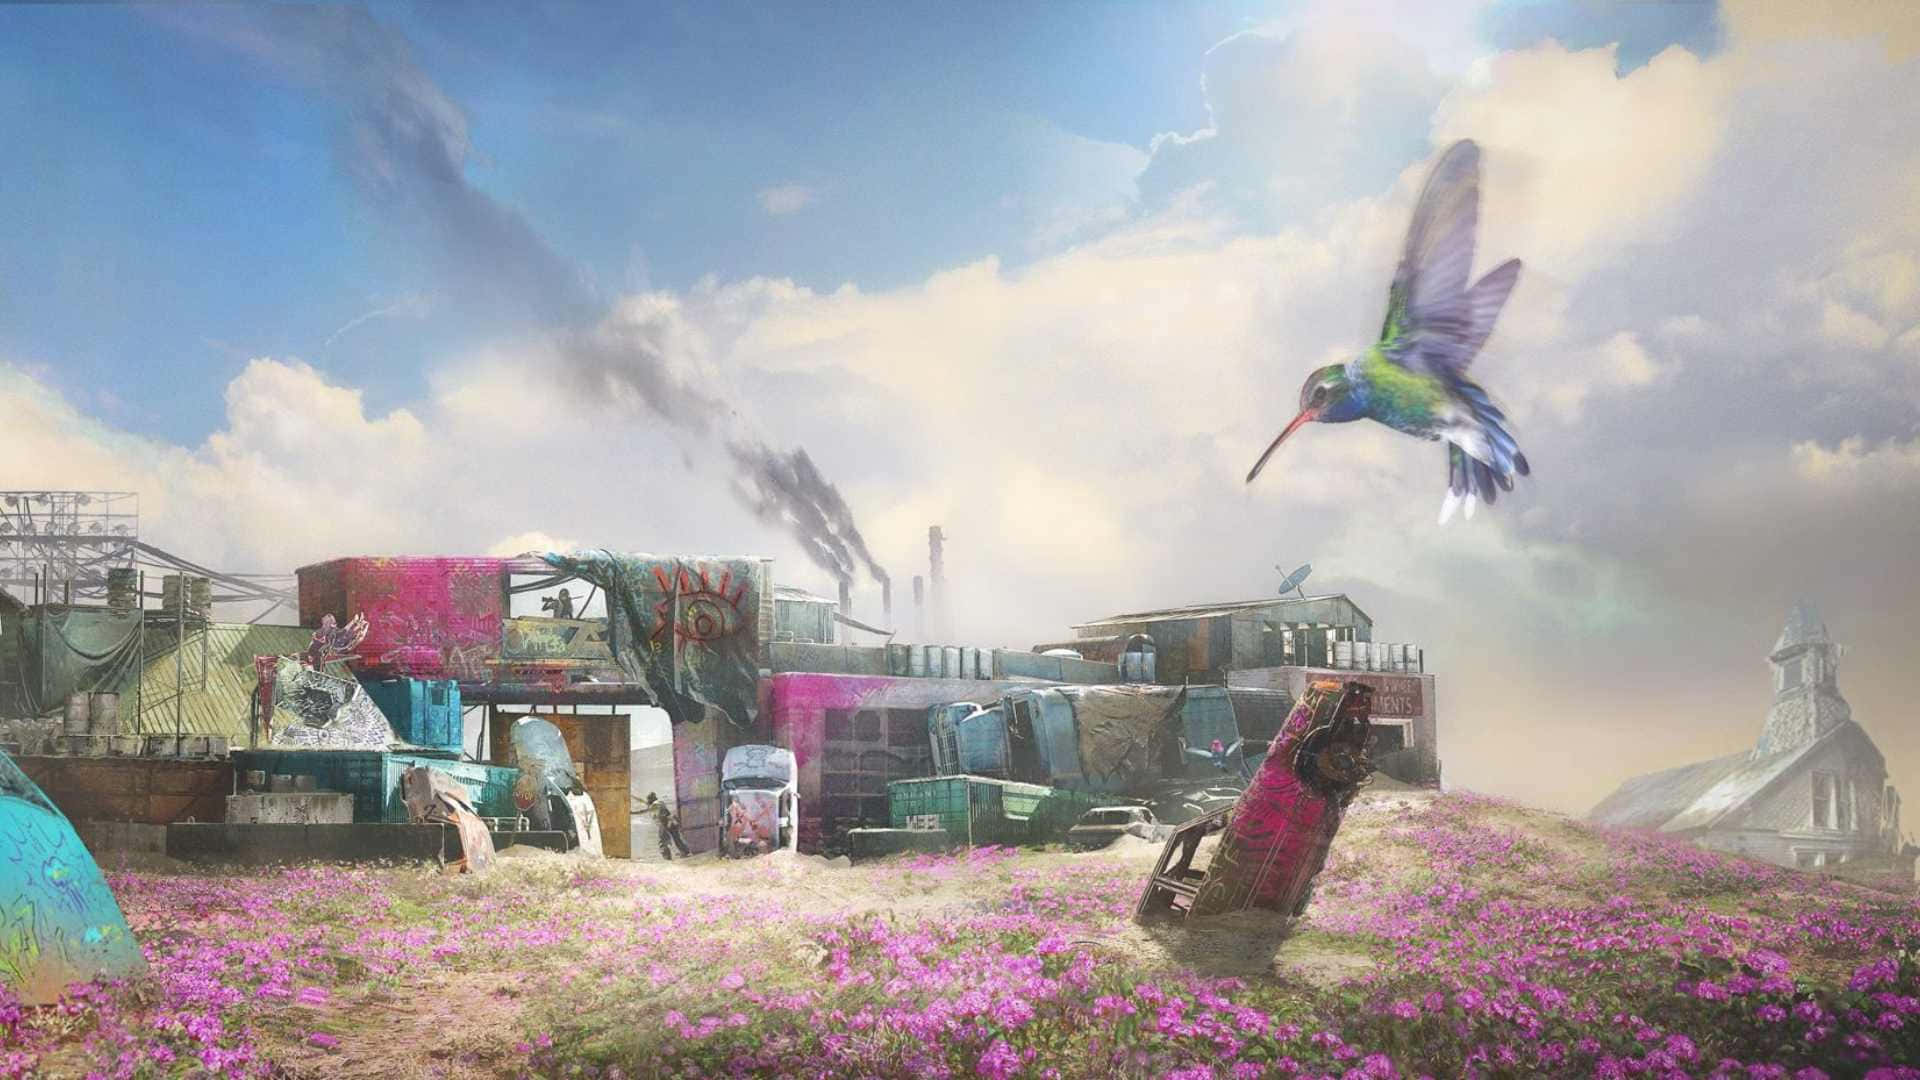 A Hummingbird Is Flying Over A Field Of Flowers